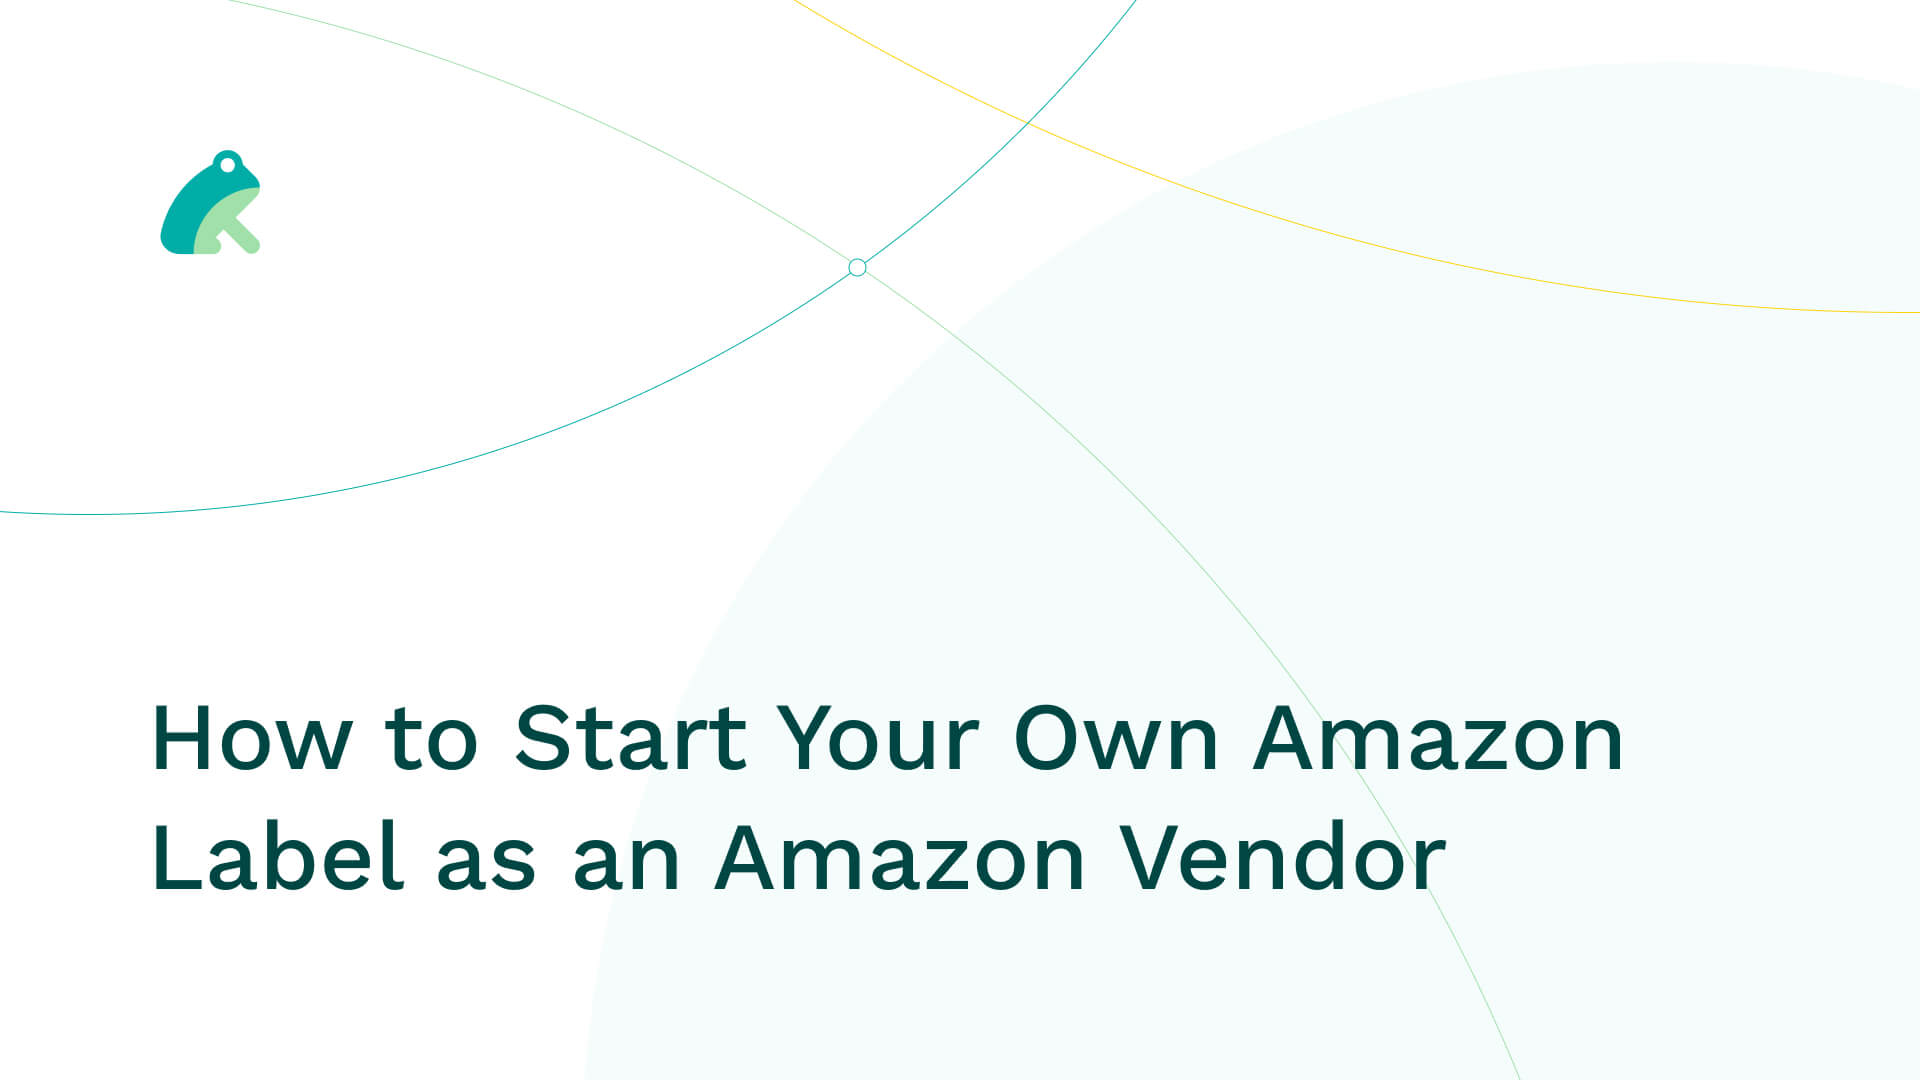 How to Start Your Own Amazon Label as an Amazon Vendor